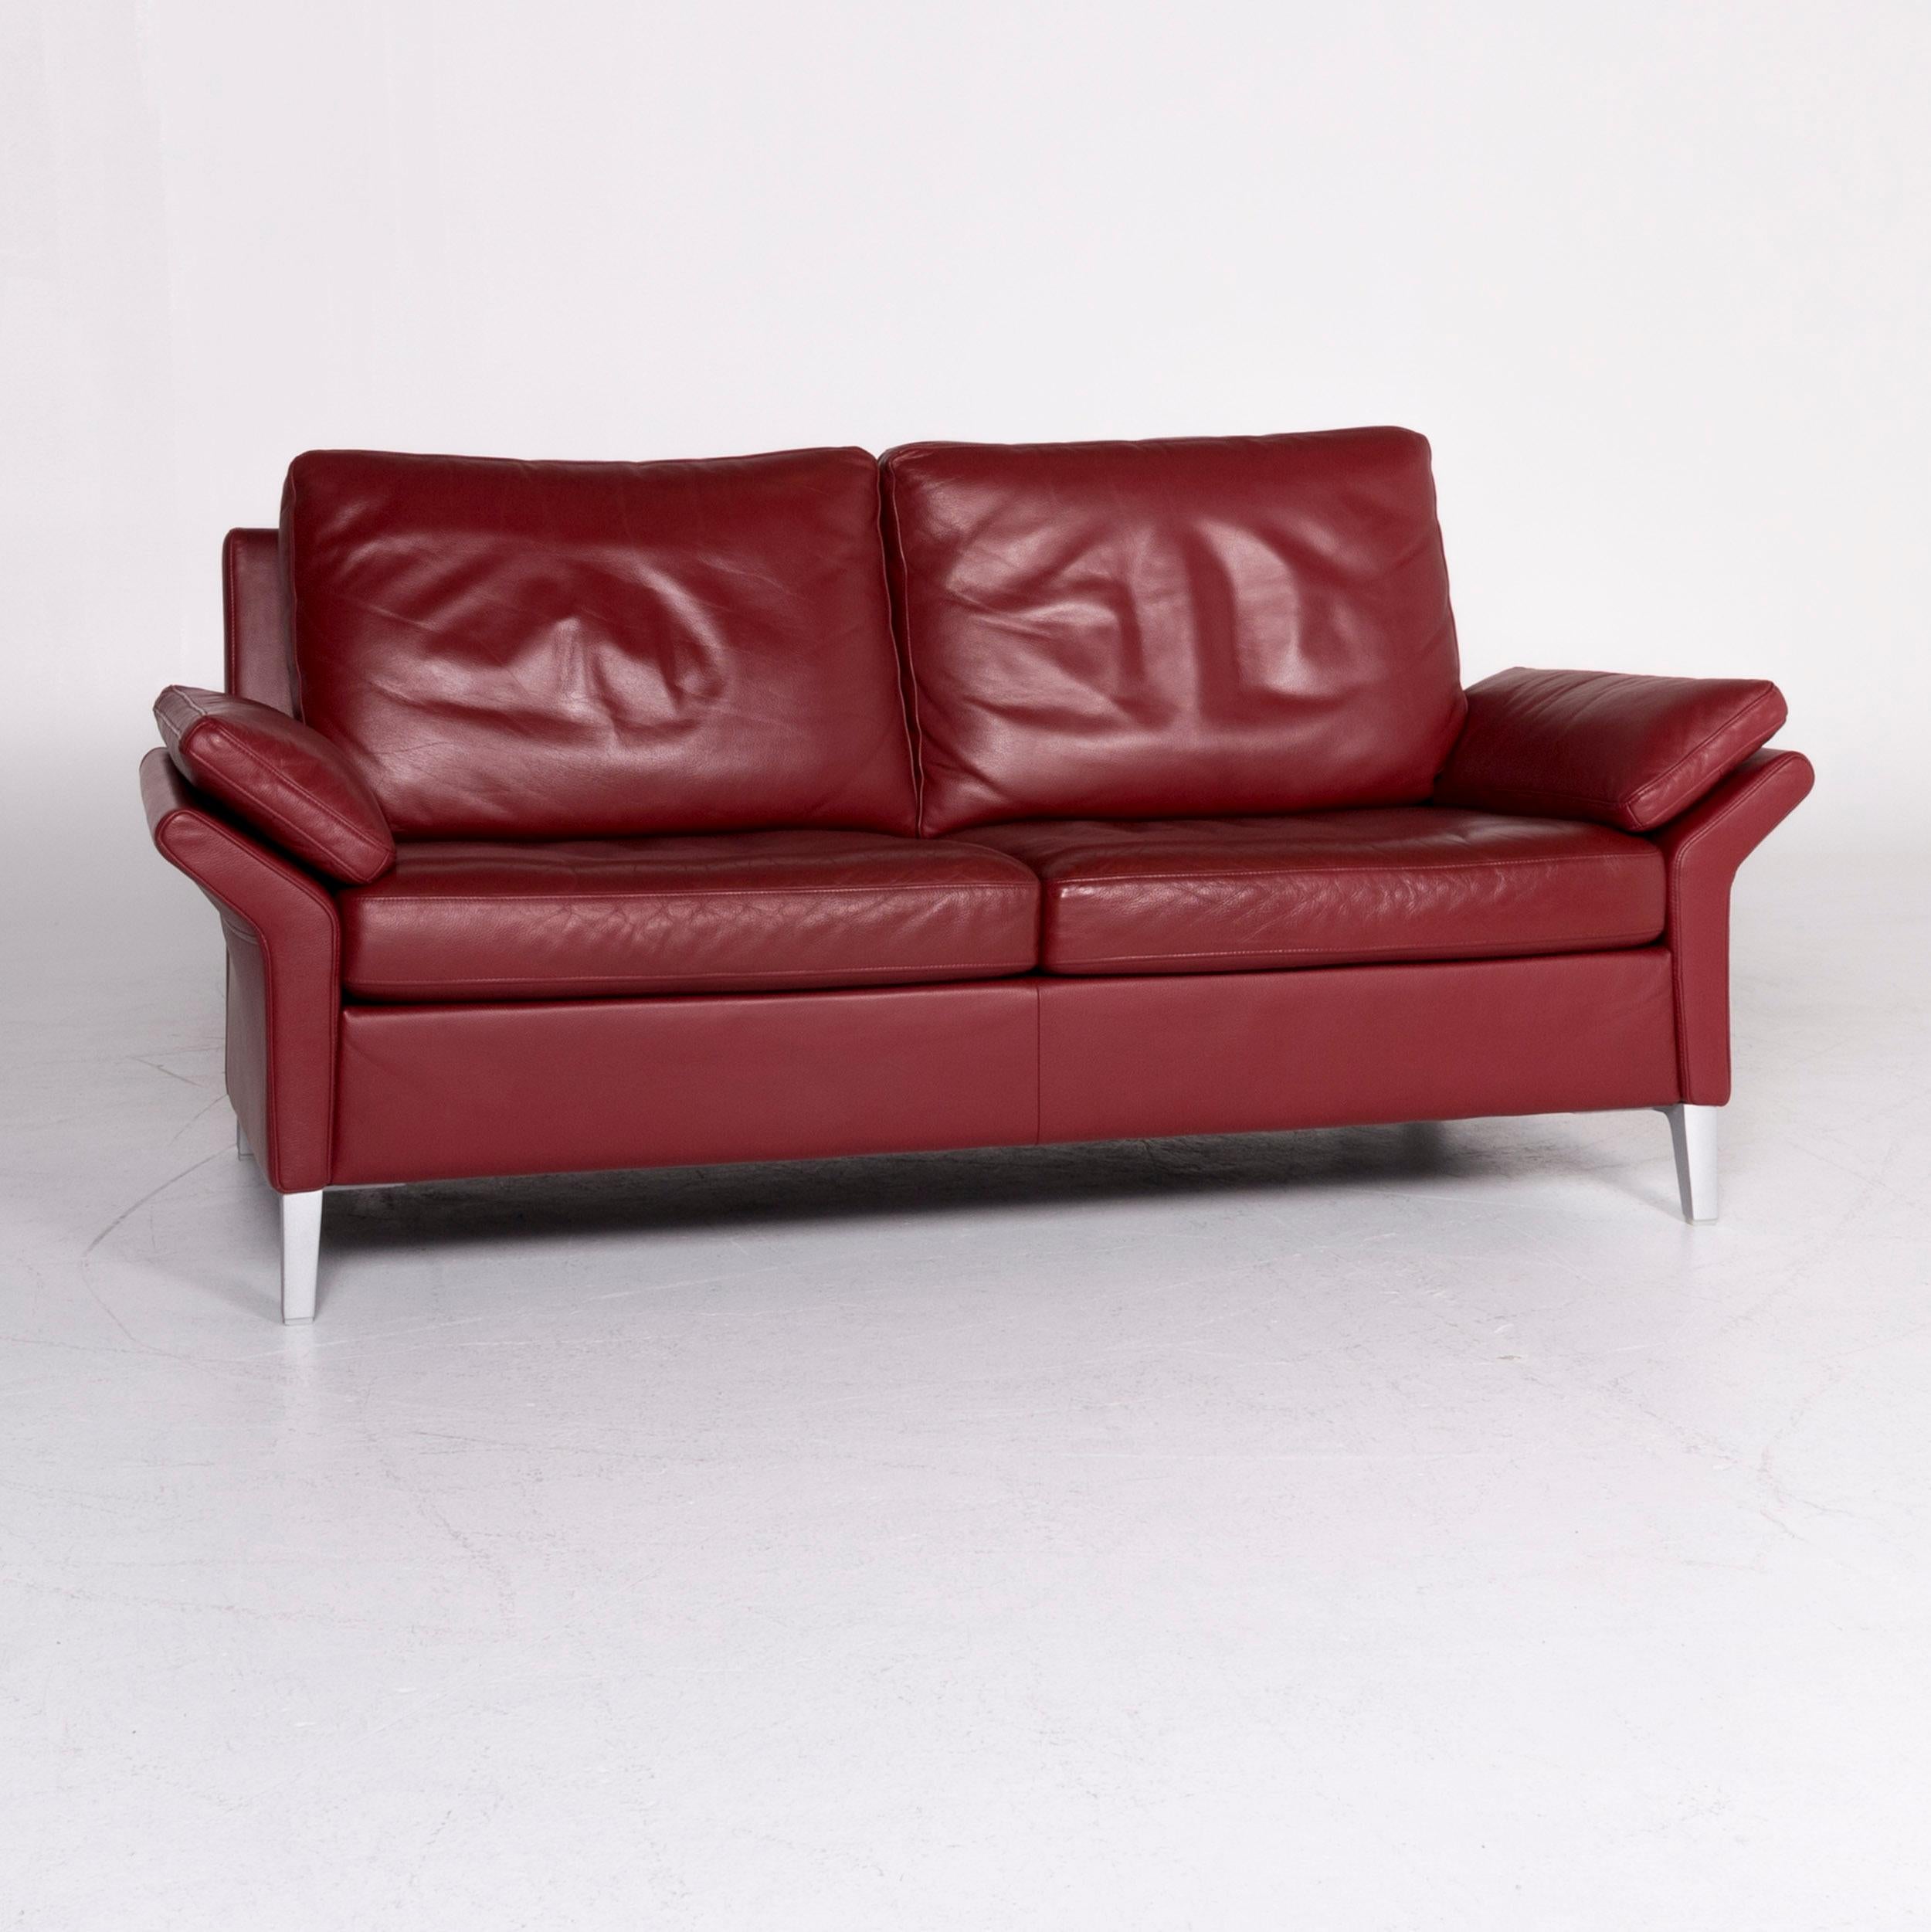 Modern Rolf Benz 3300 Designer Leather Sofa Red Genuine Leather Two-Seat Couch